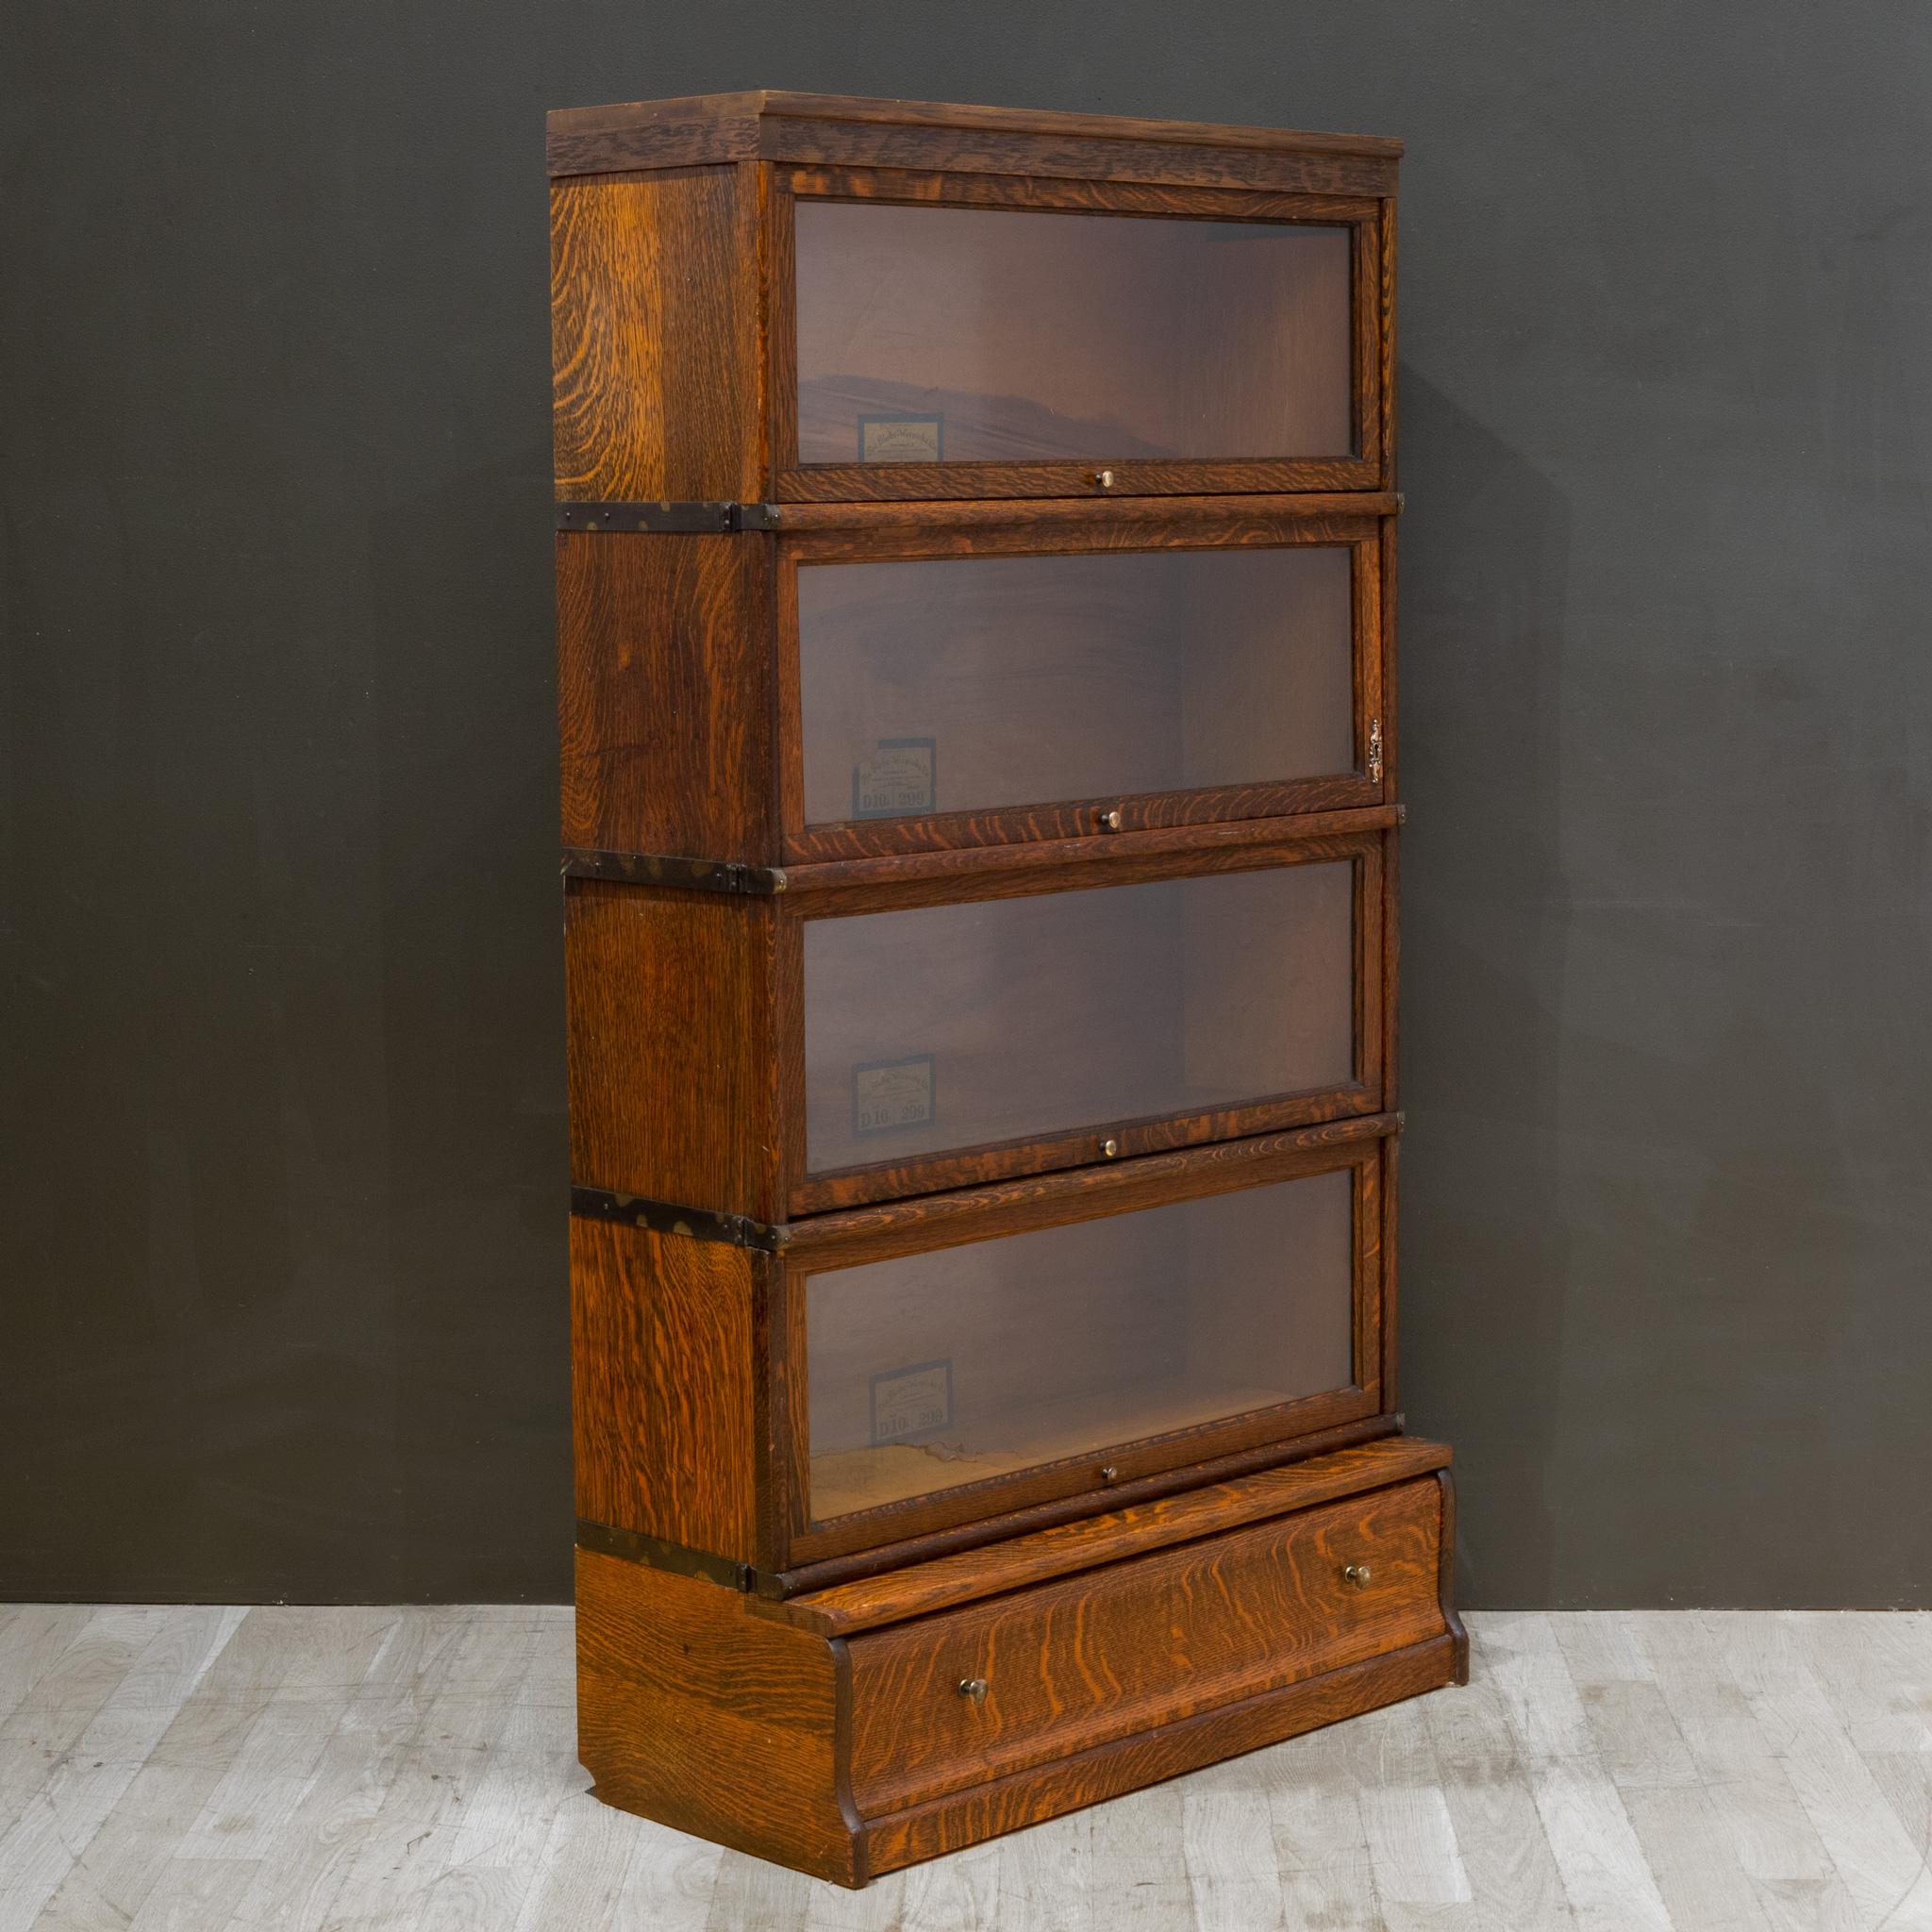 Industrial Globe-Wernicke 4 Stack Lawyer's Bookcase with Rare Bottom Drawer c.1910